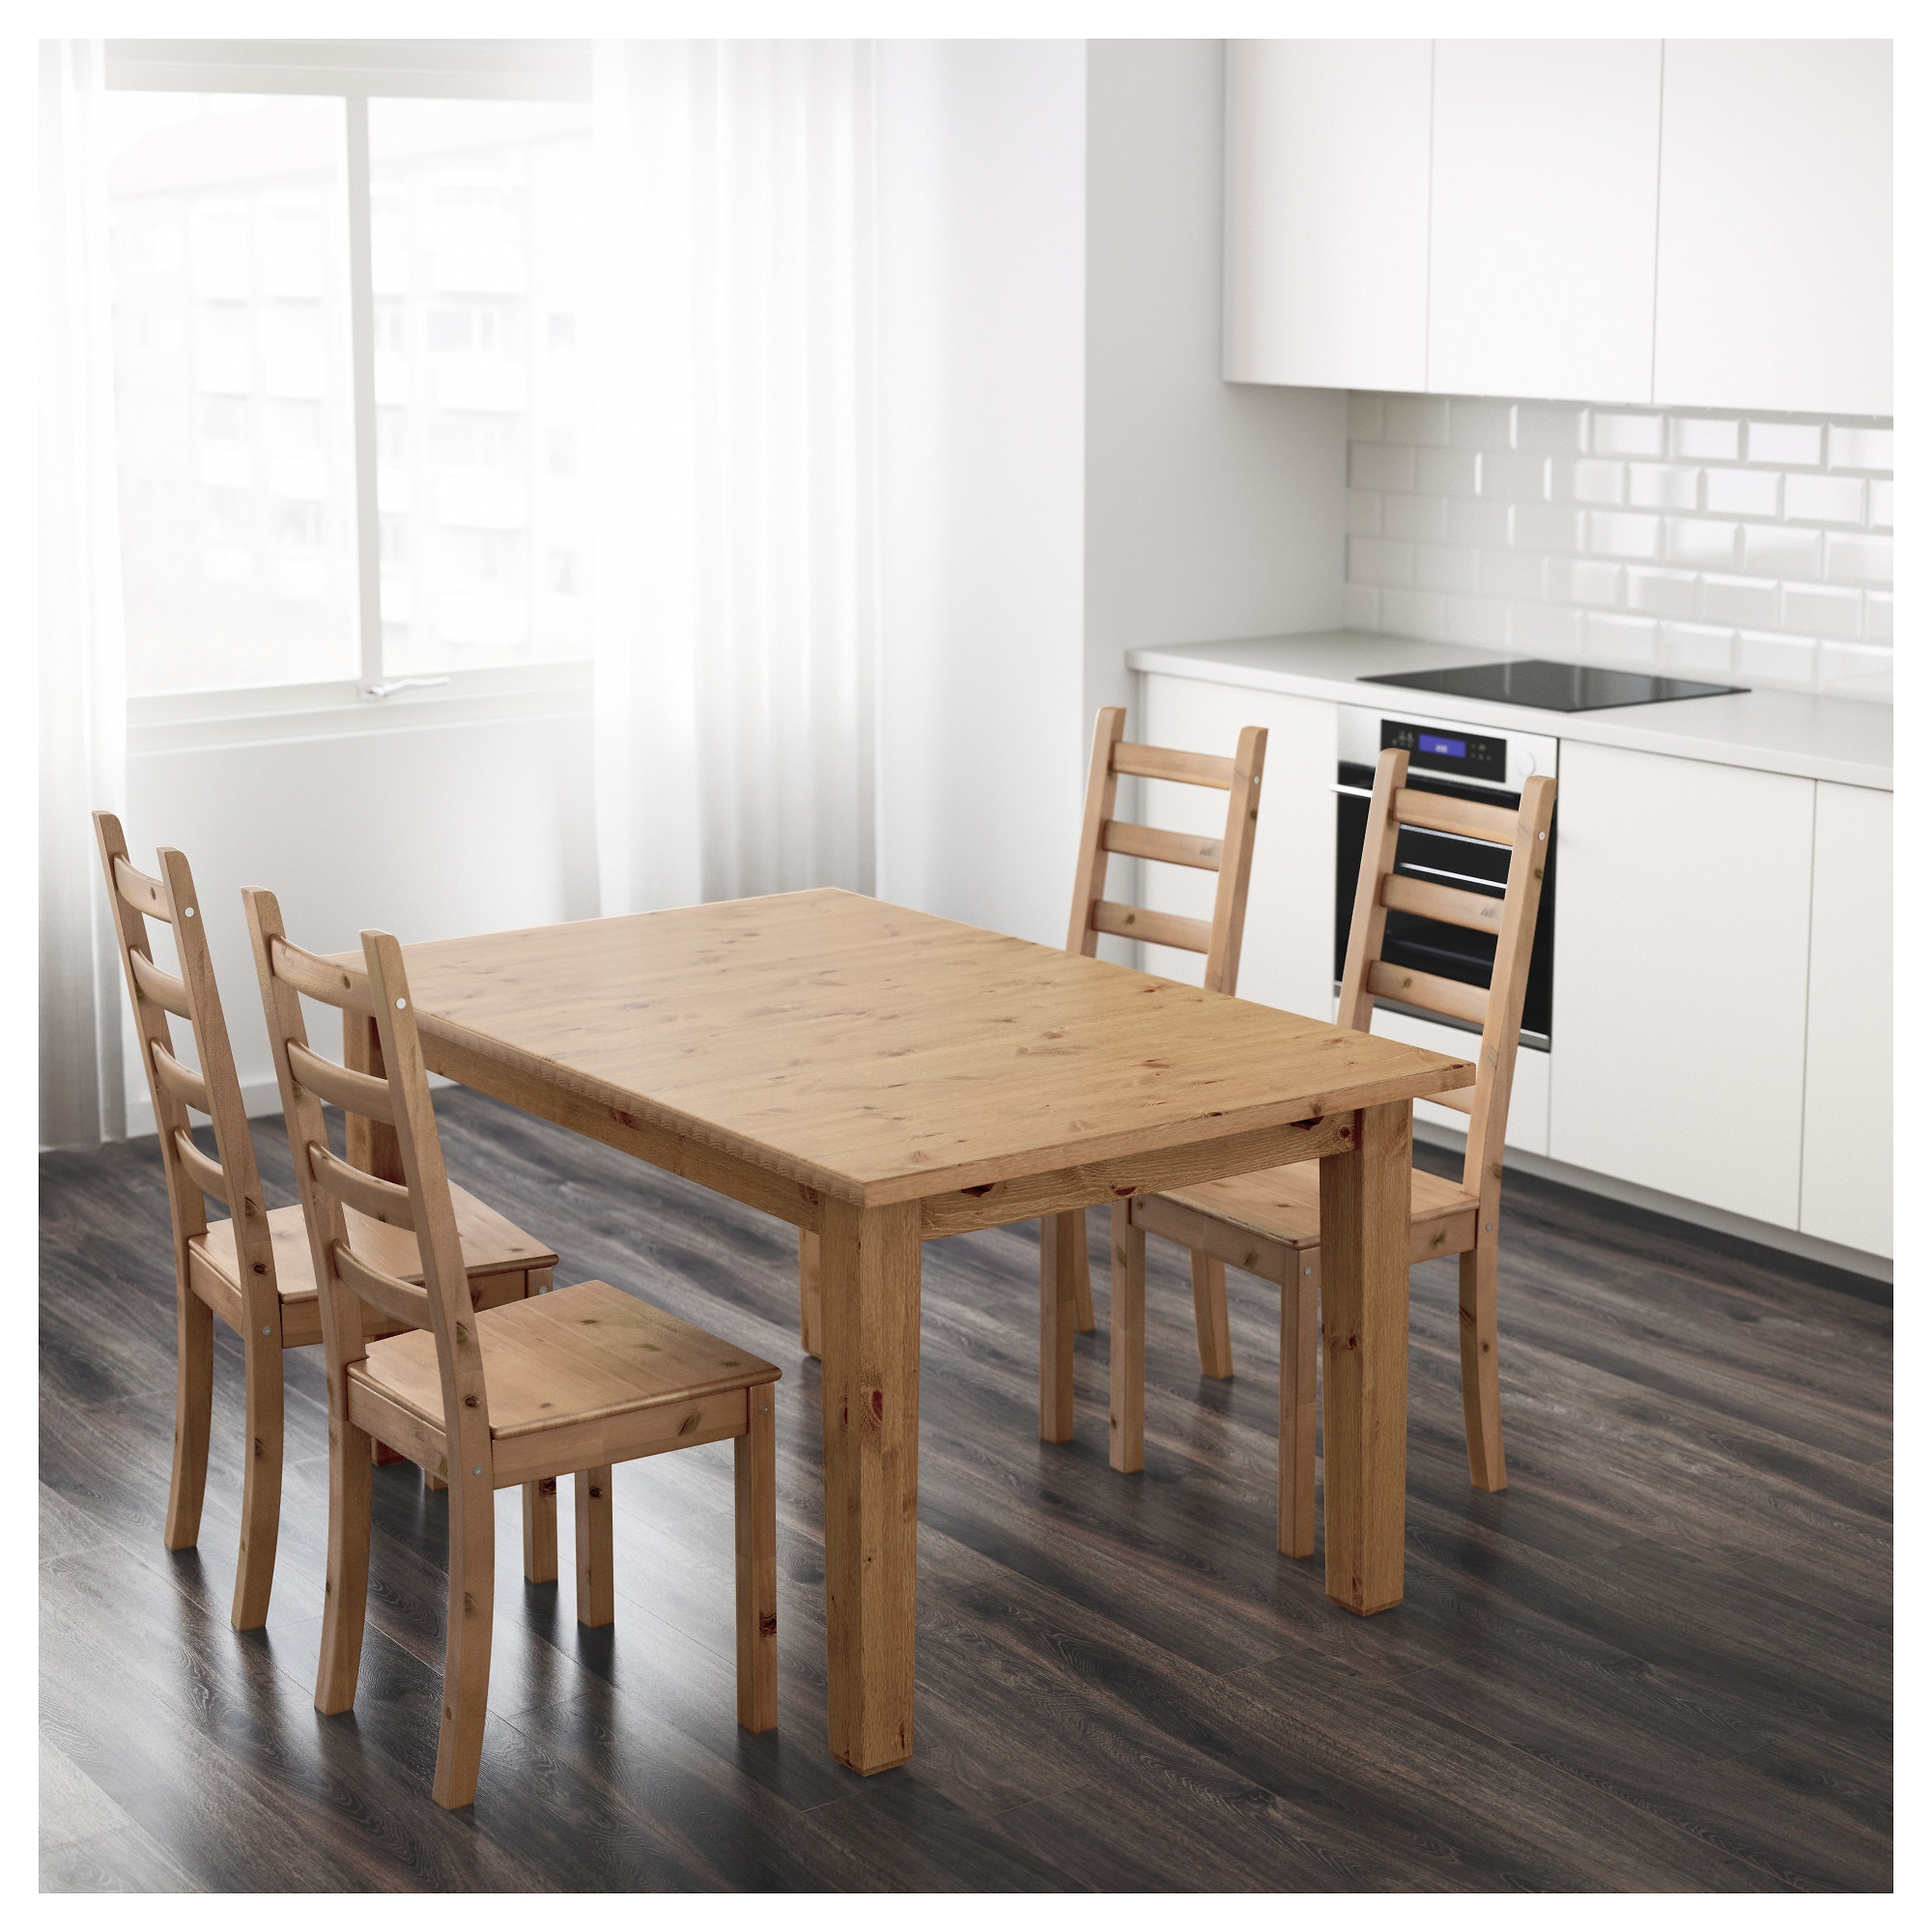 24 Spectacular Hardwood Floor Store Bolingbrook Il 2024 free download hardwood floor store bolingbrook il of stornac284s extendable table ikea with regard to 0449446 pe598886 s5 jpg